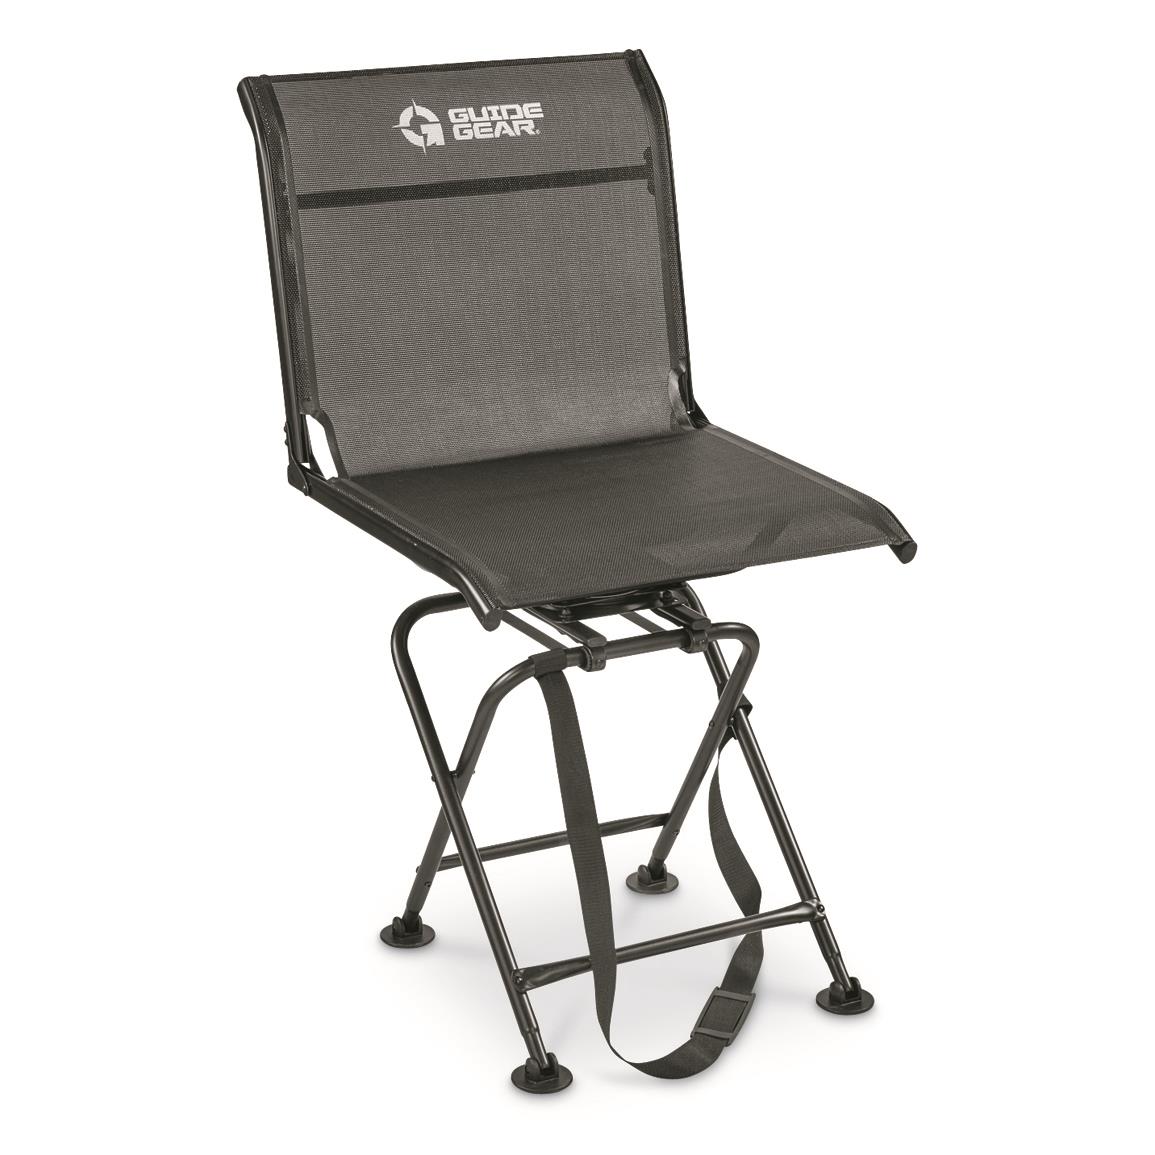 Guide Gear Big Boy Comfort Swivel Hunting Blind Chair 500 Lb Capacity 697304 Stools Chairs Seat Cushions At Sportsman S Guide